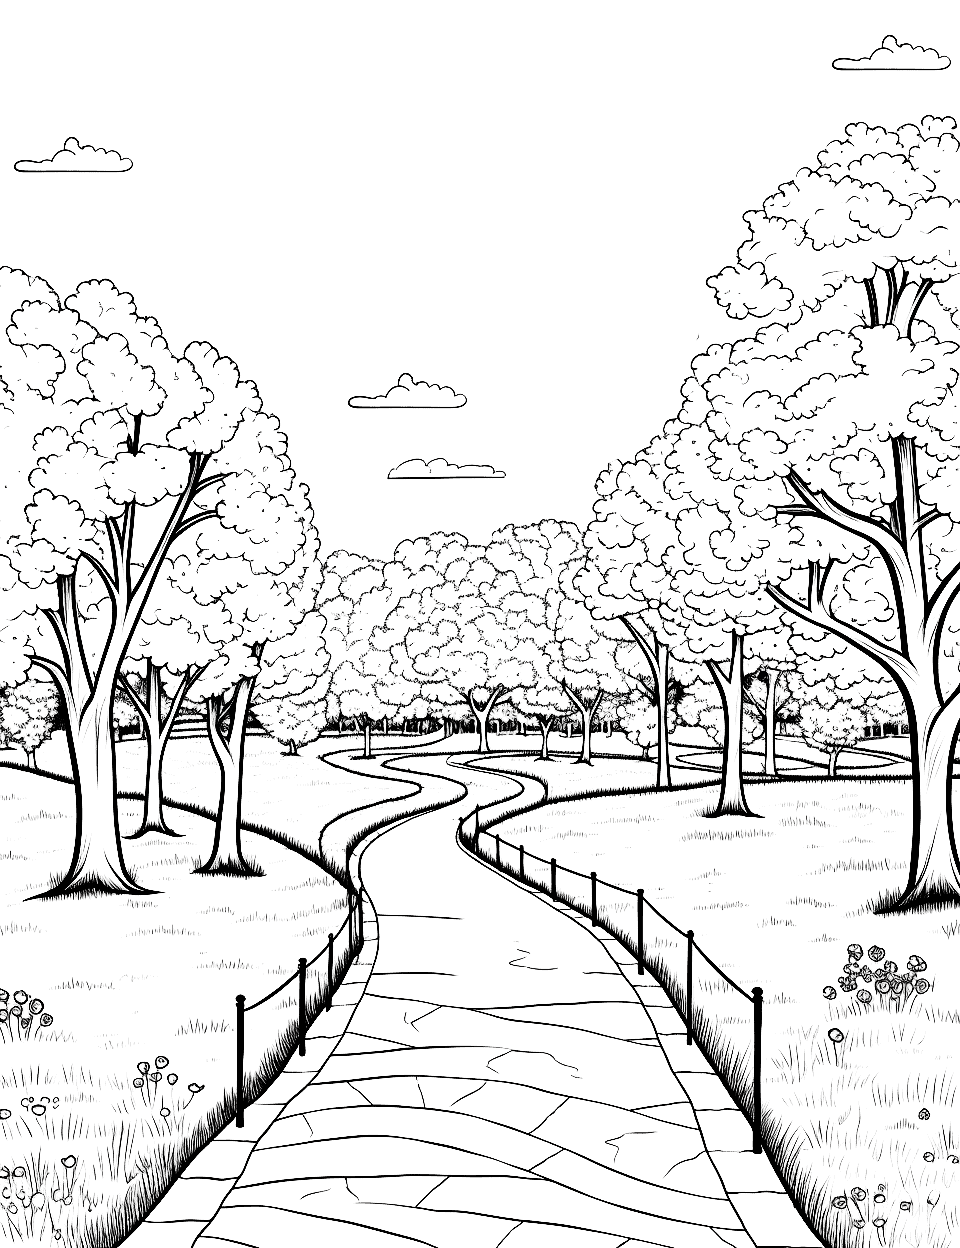 Cherry Blossom Park in Spring Coloring Page - A park filled with blooming cherry blossom trees and a clear sky.